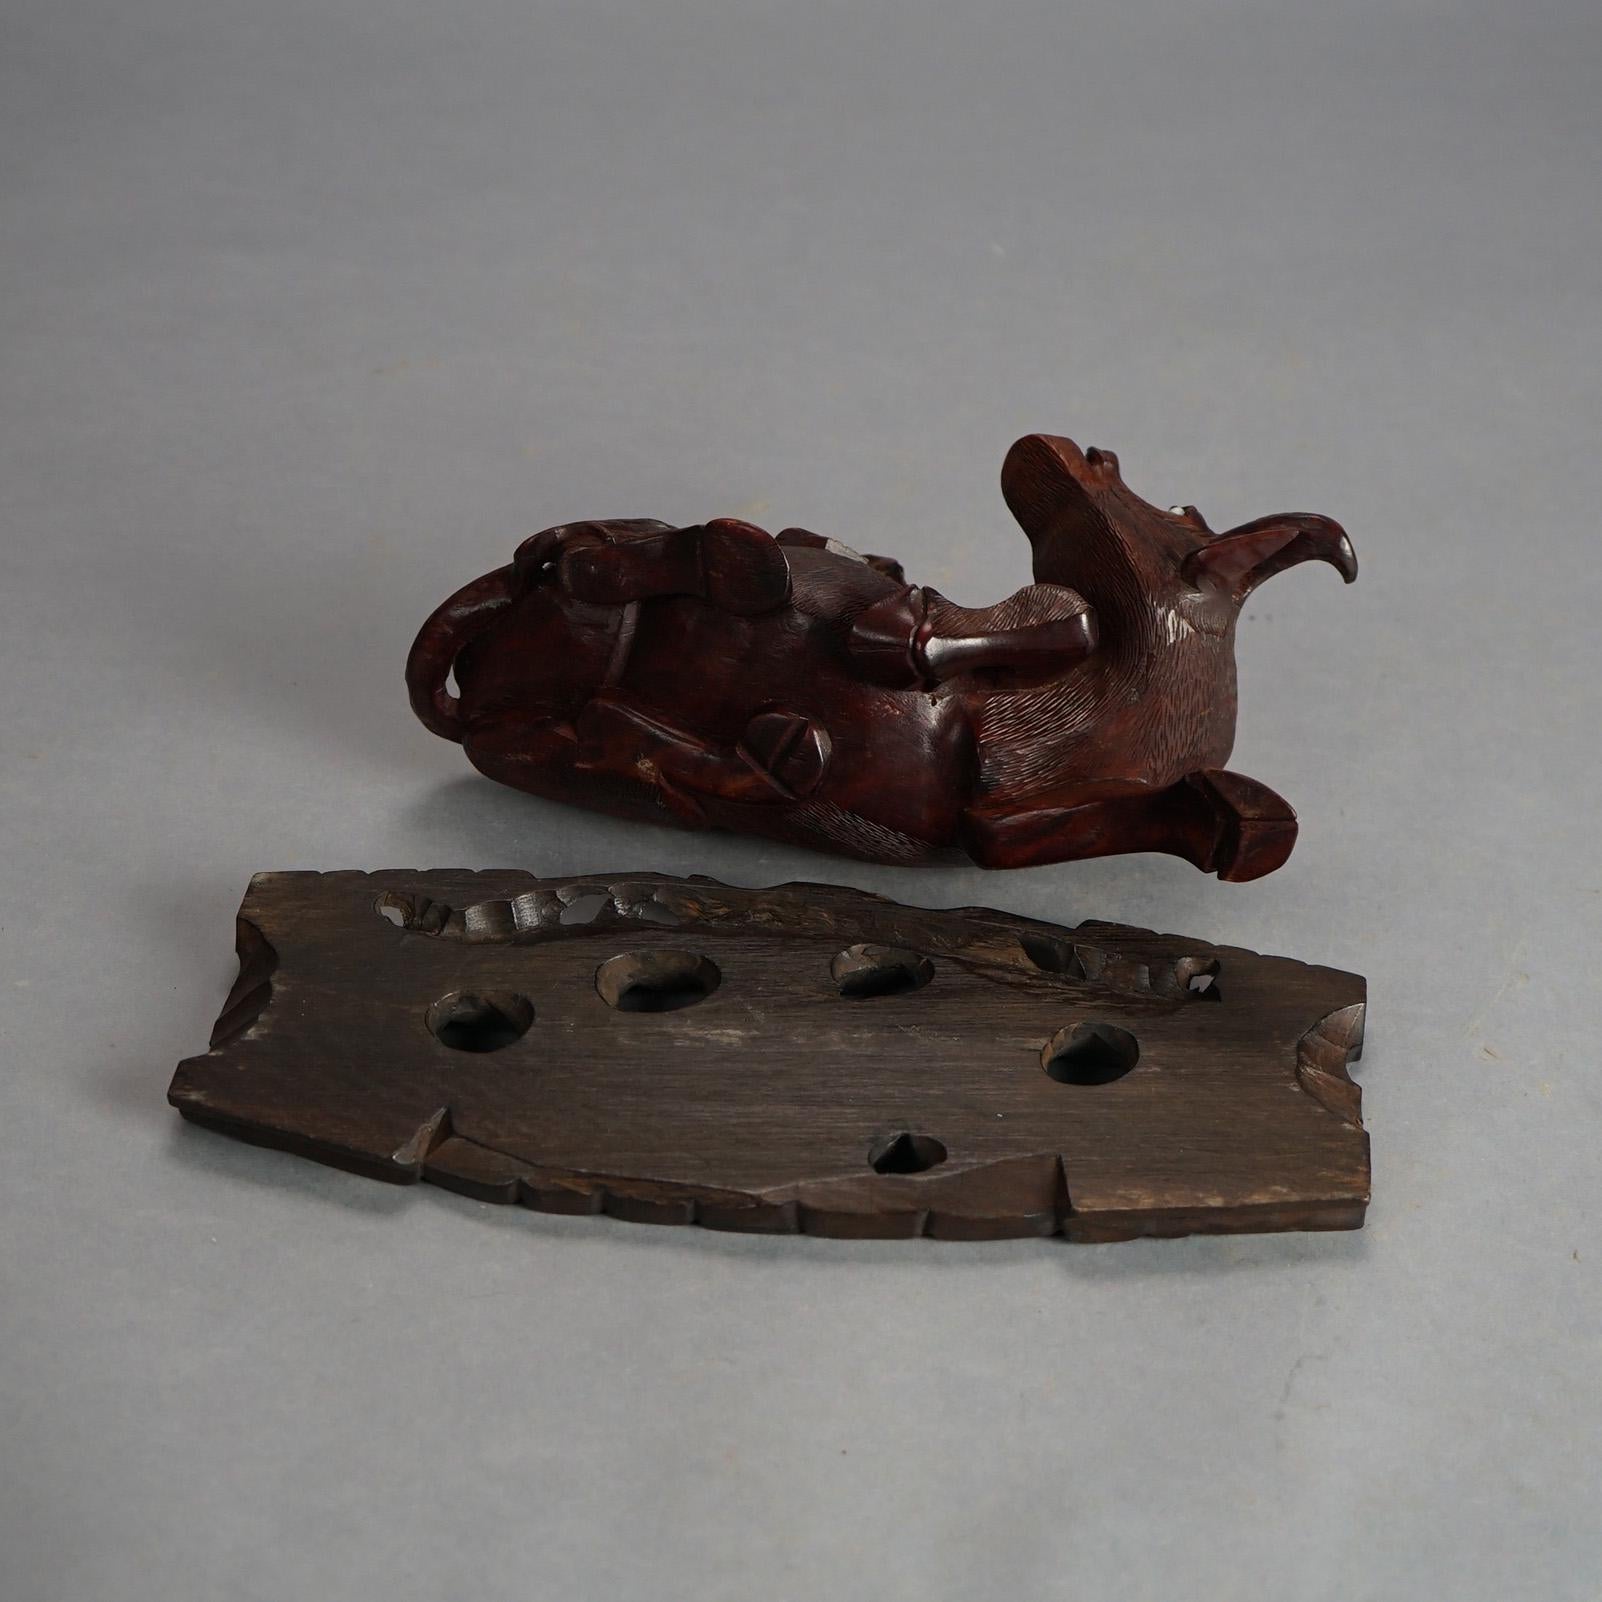 Antique Chinese Carved Wood Sculpture of Water Buffalo with Figures C1920 For Sale 3